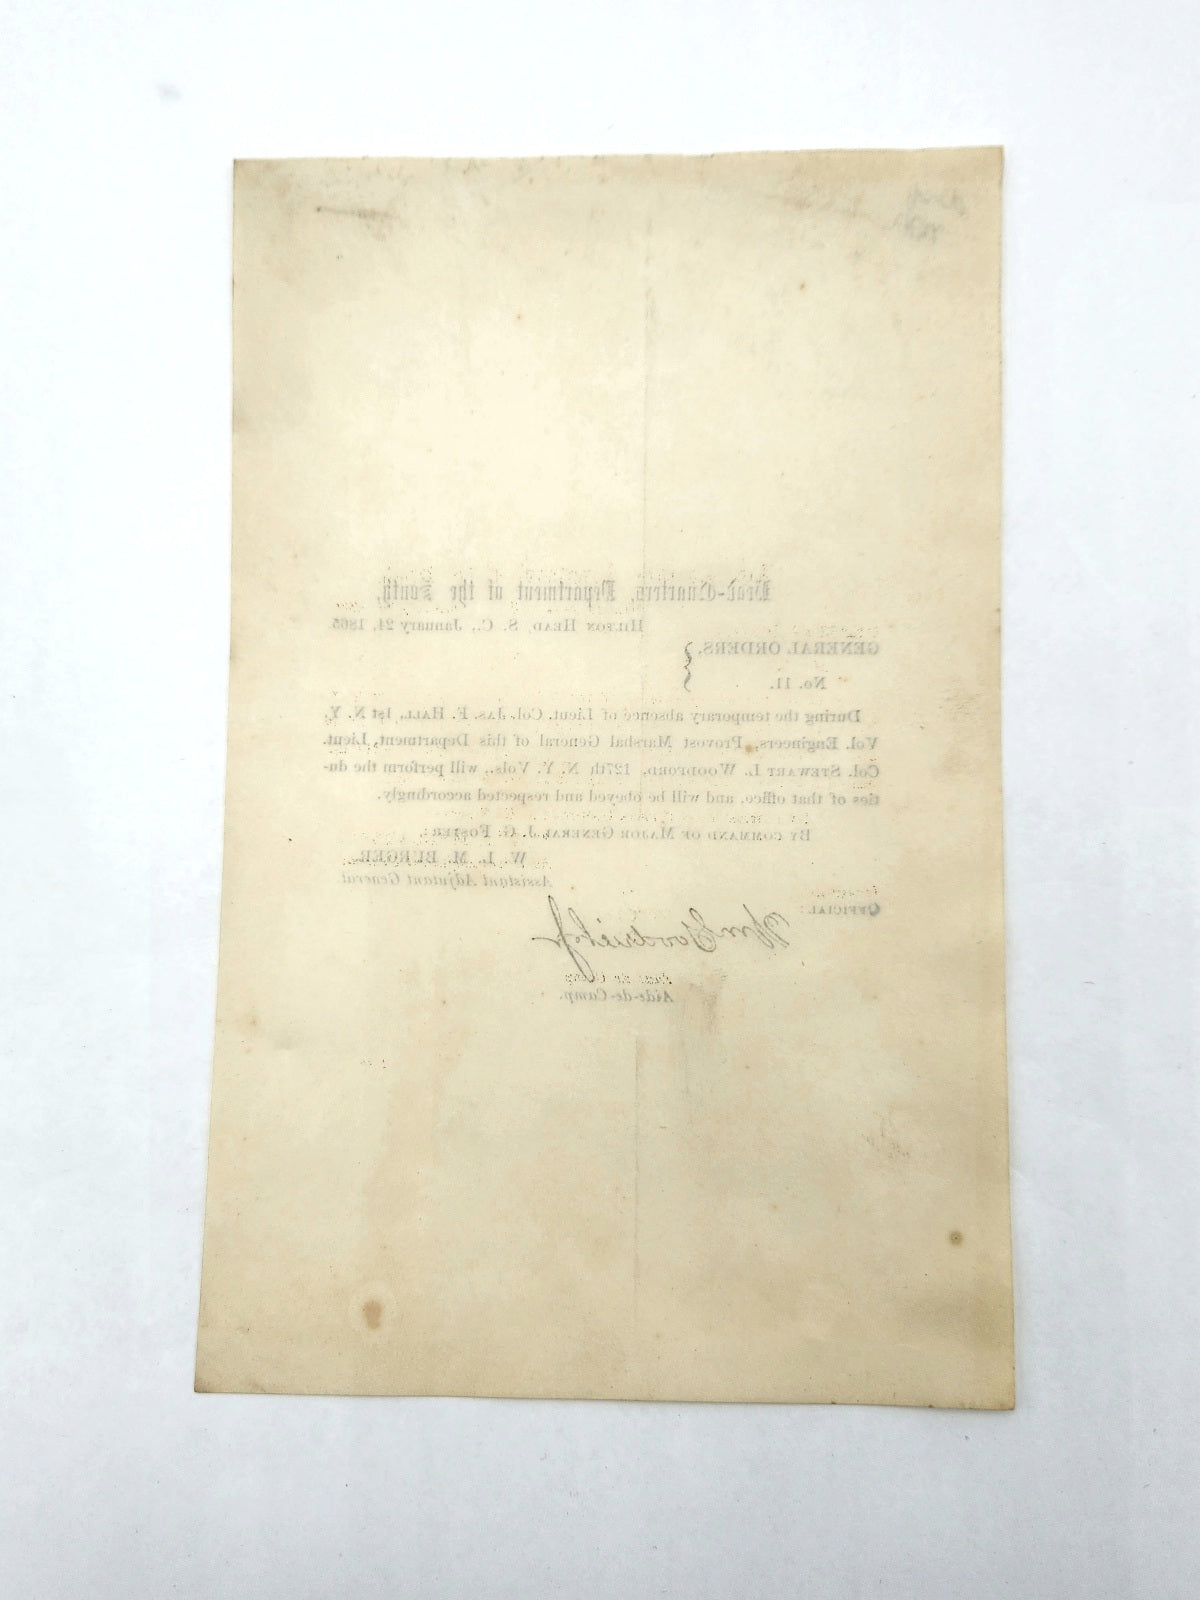 Headquarters, Dept. Of The South General Orders No. 11